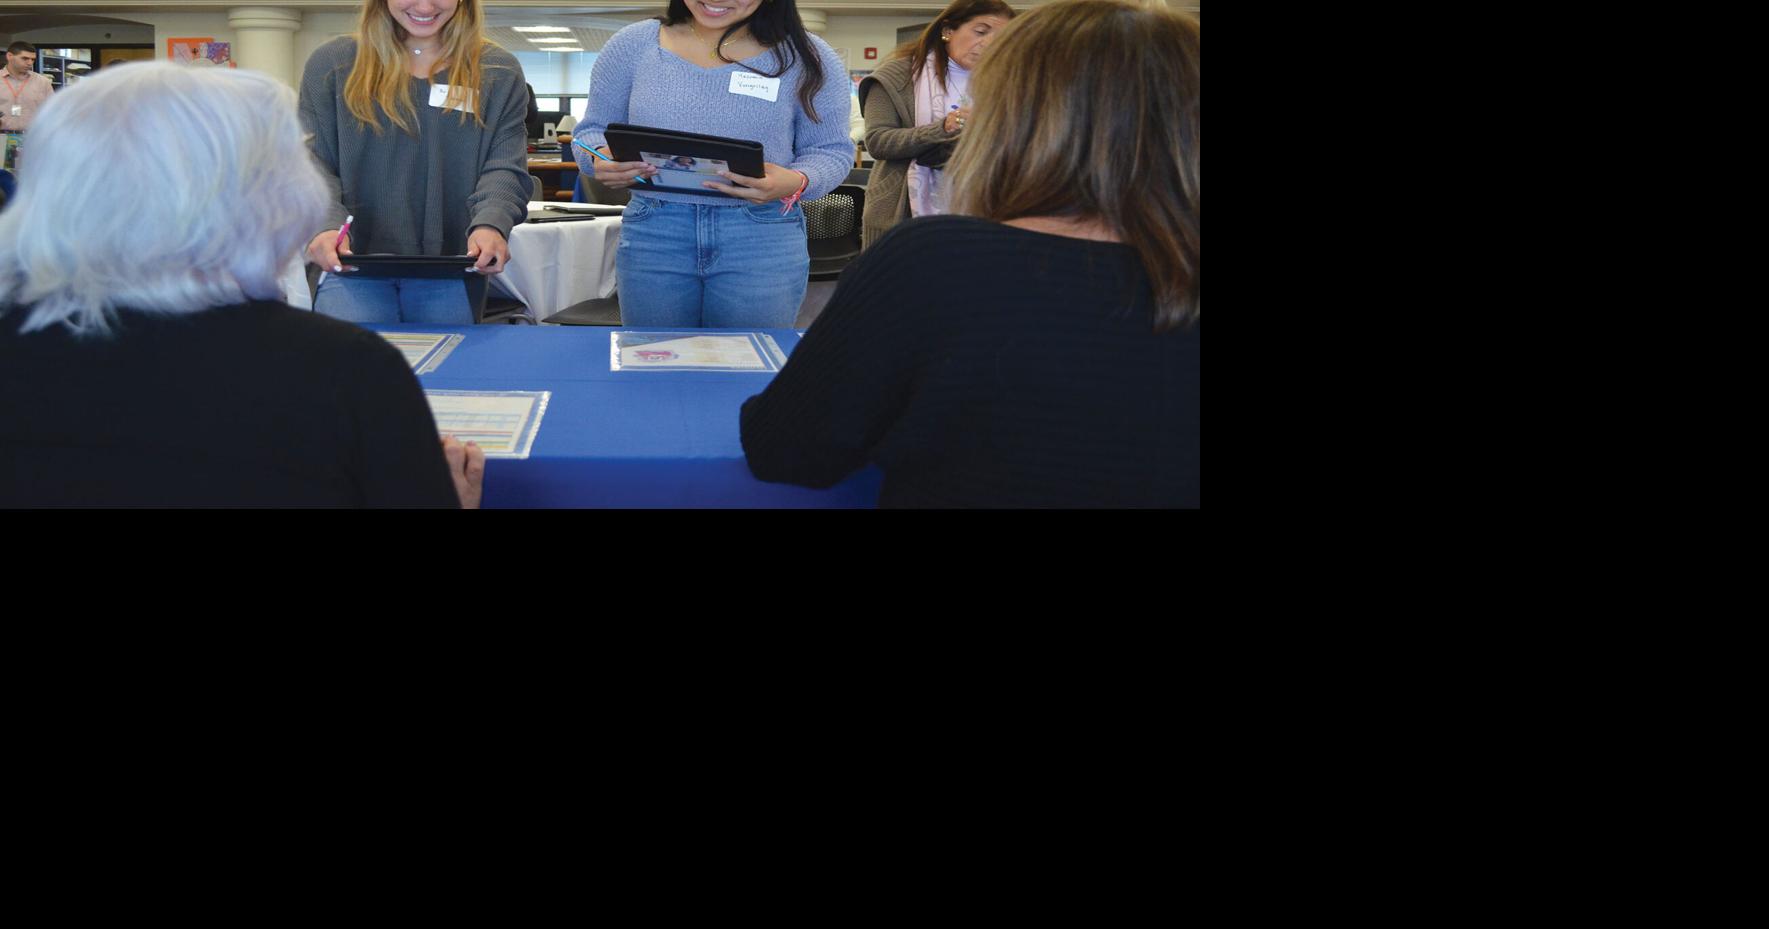 Time well spent: WWHS students test personal finance skills during BankNewport fair | Kent County Daily Times